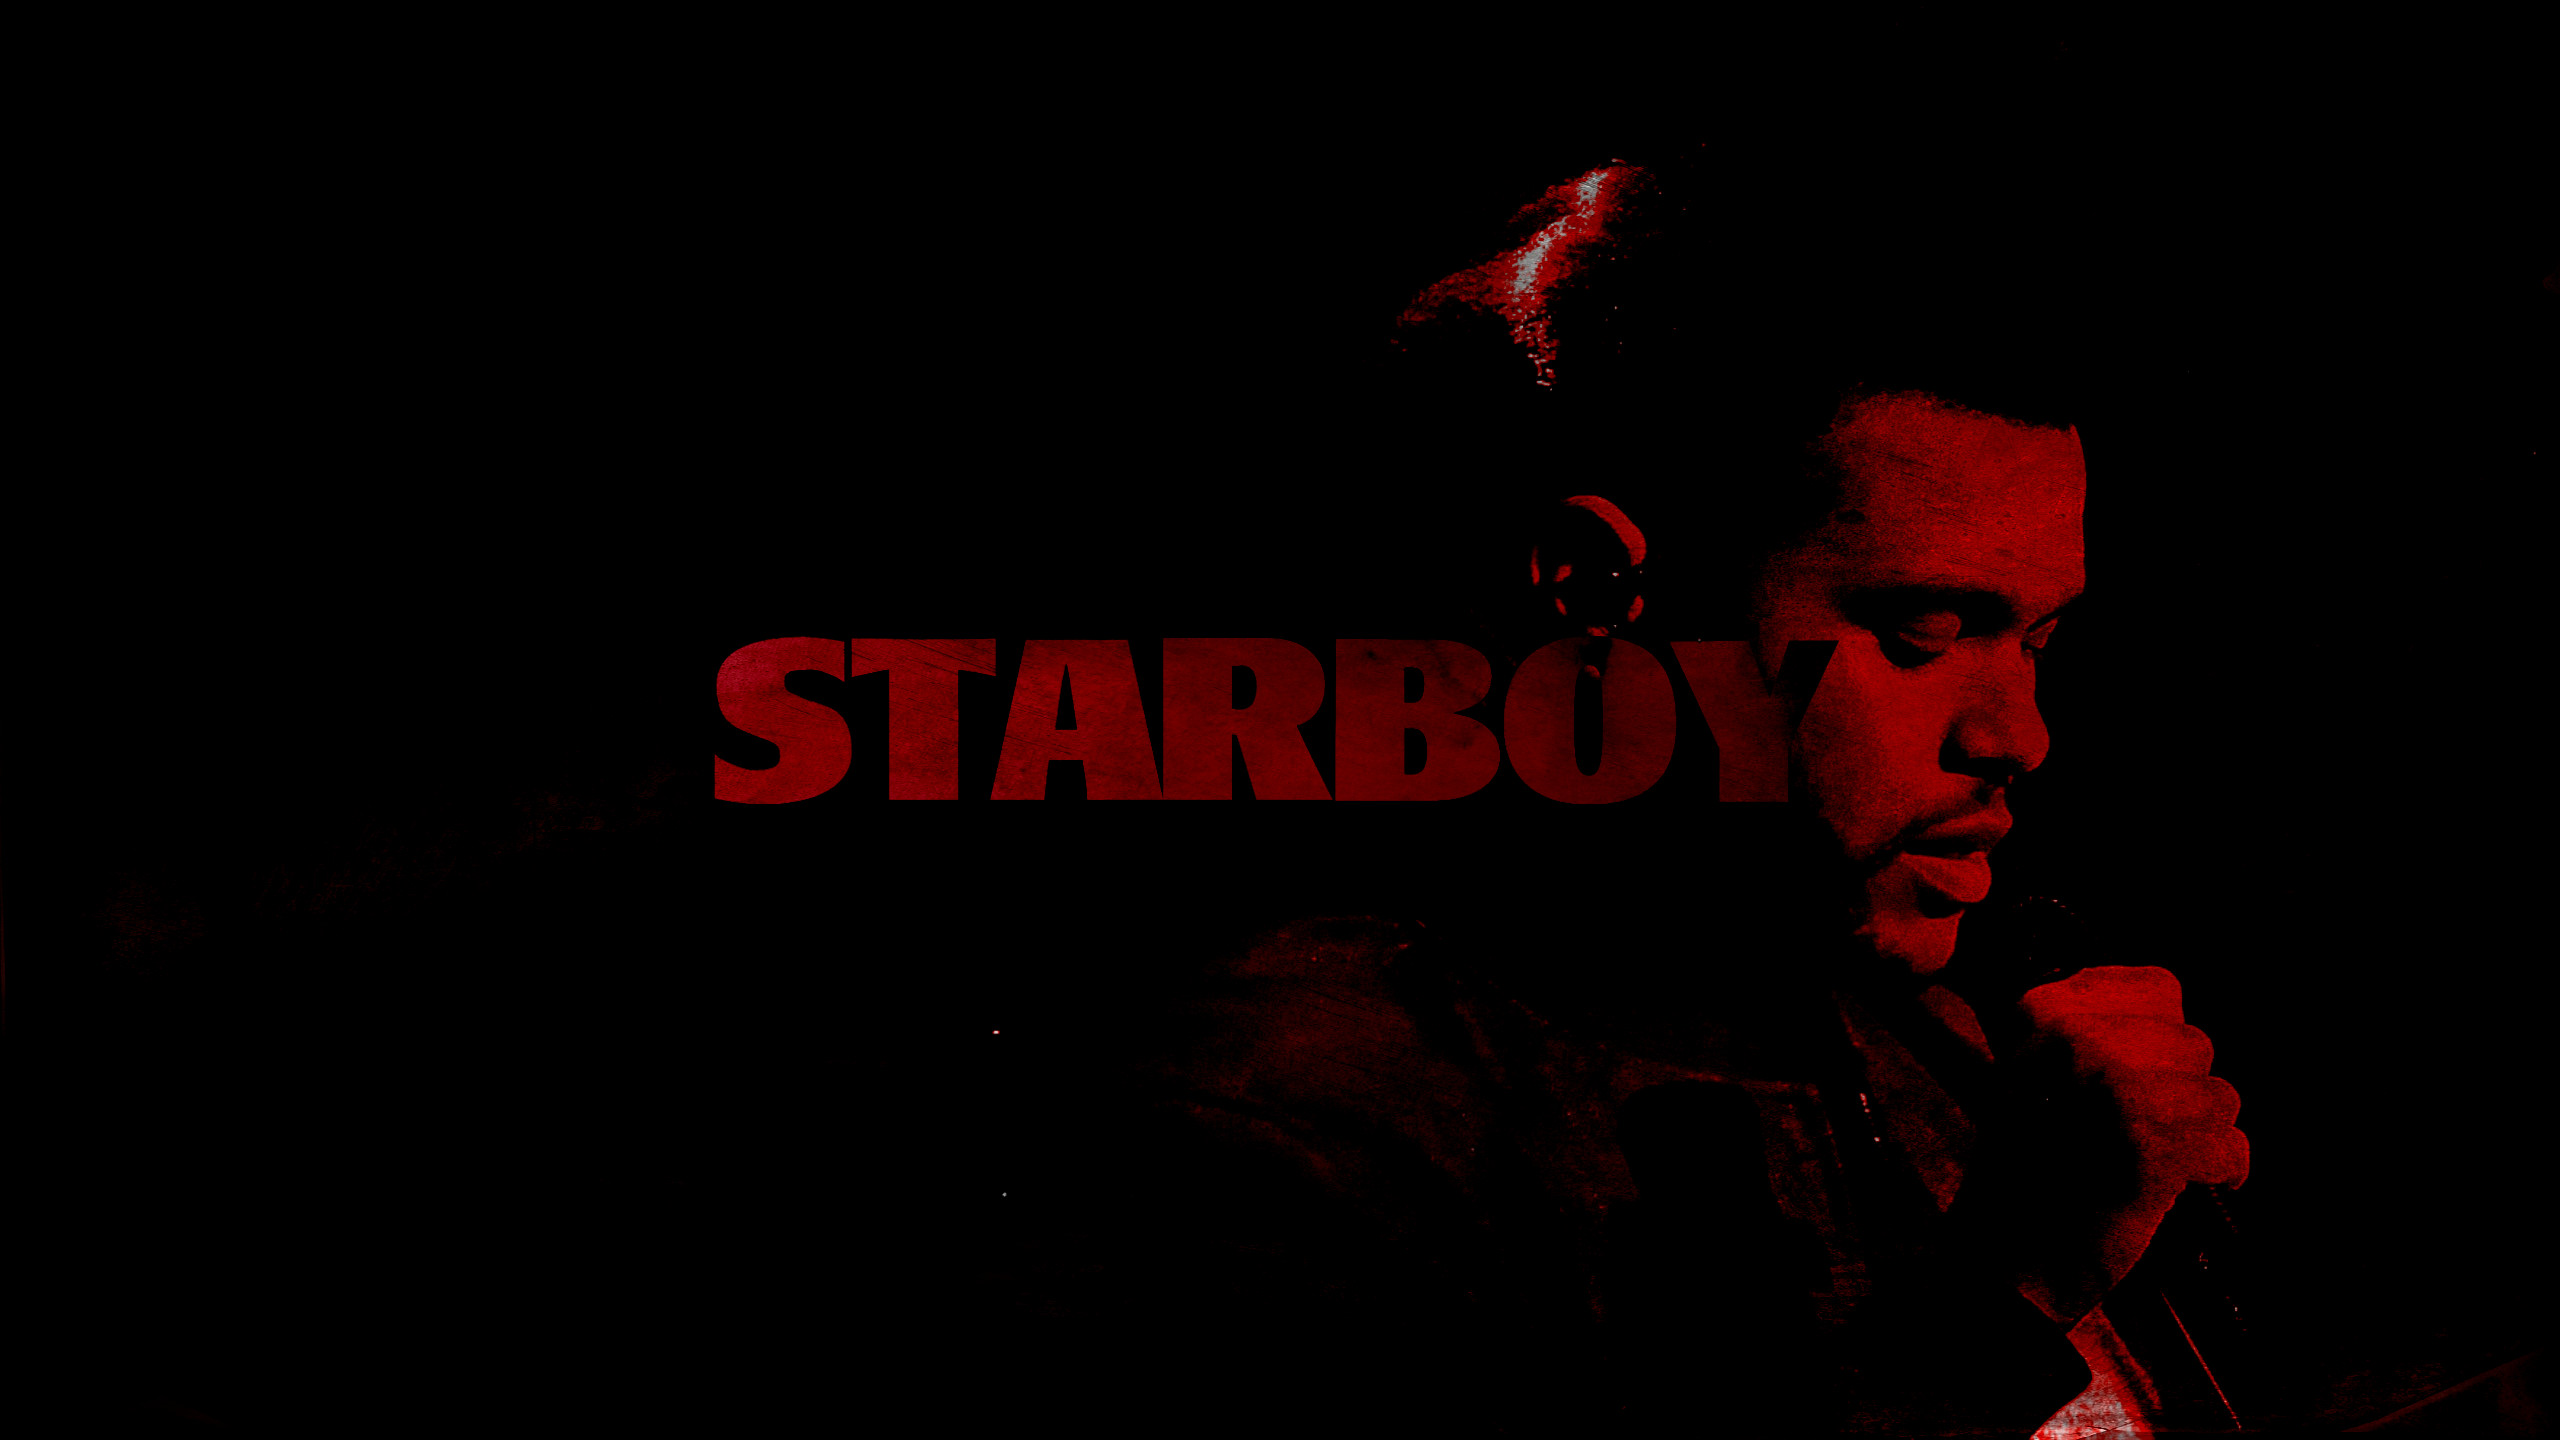 2560x1440 1920x1080px Cool The Weeknd Wallpaper High Resolution 52 1456586310 Source  Â· DiscussionThe